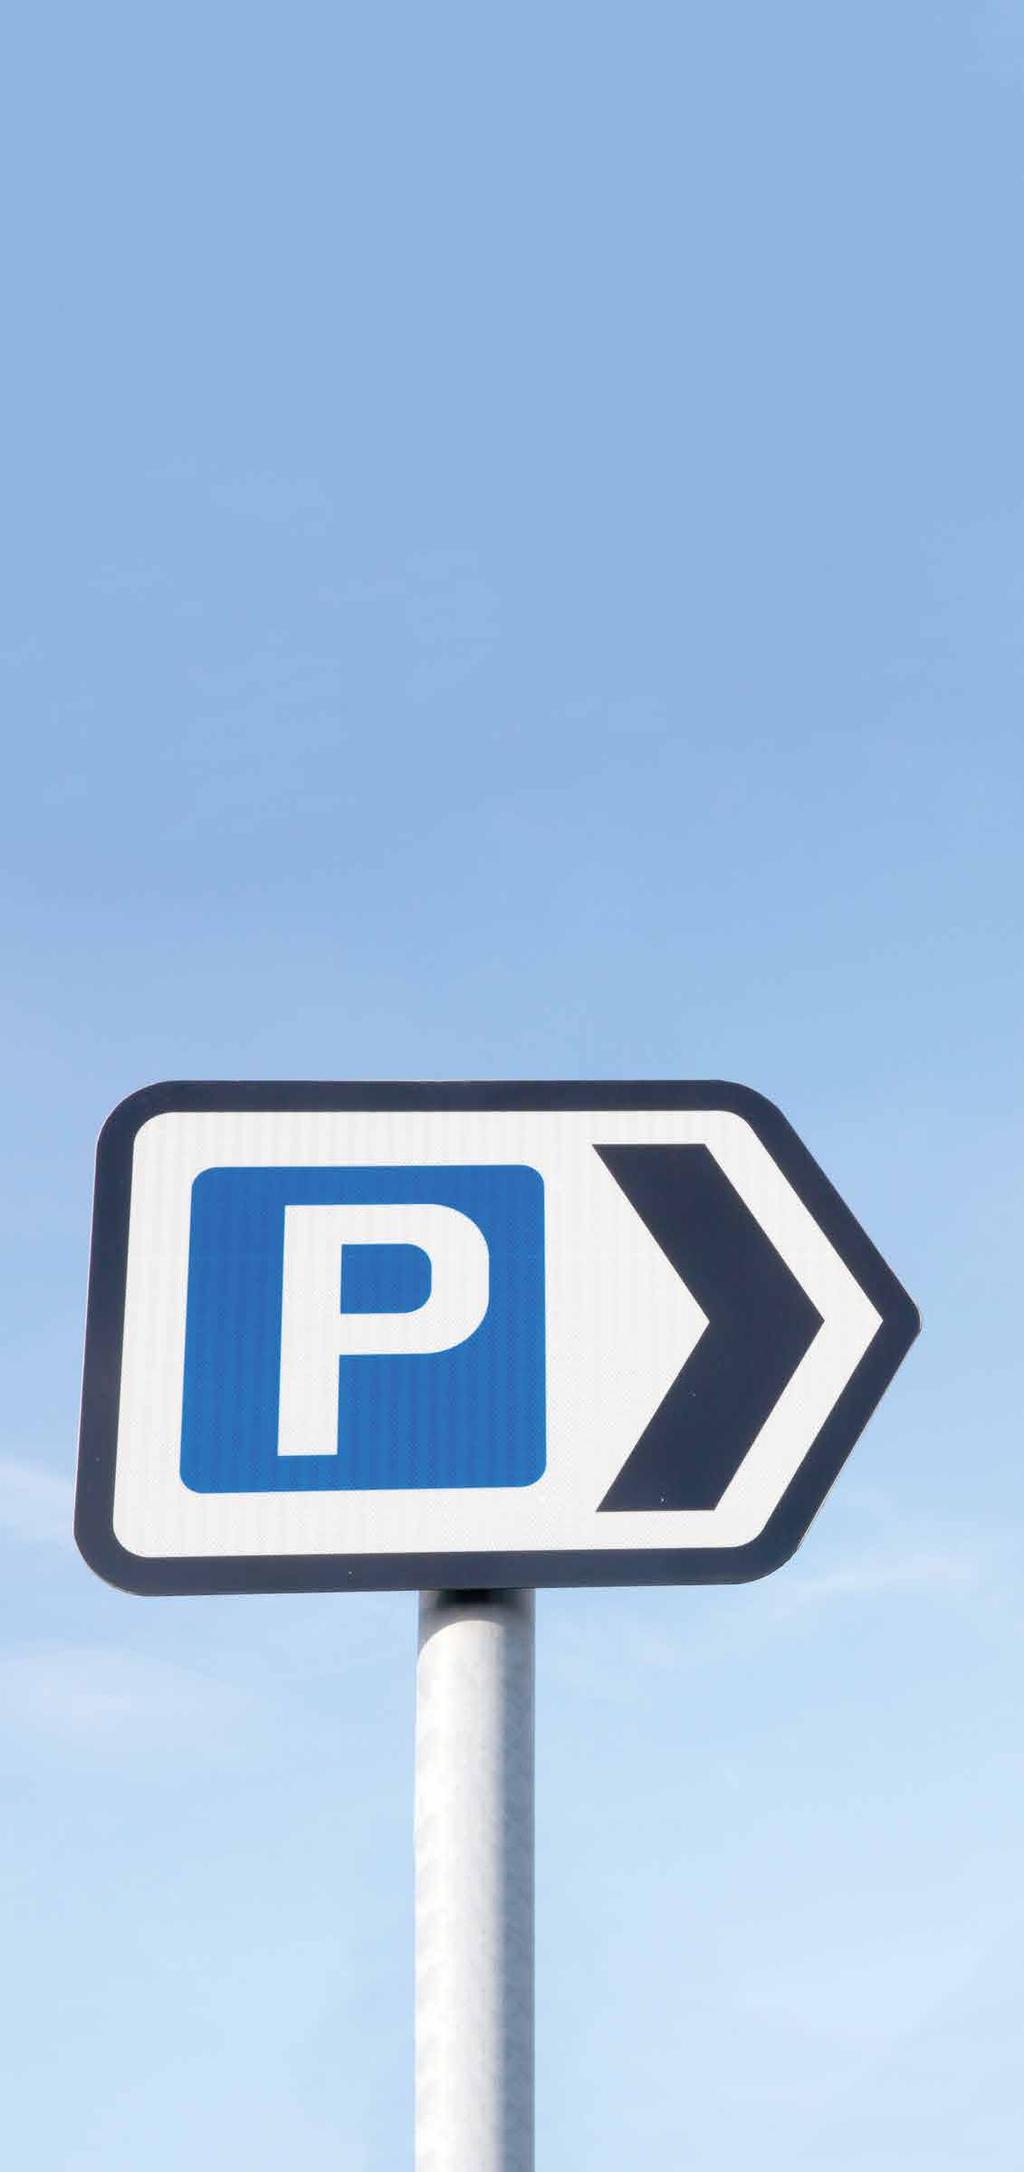 New Pay on Exit car parking system From 22 January 2018 Please note as well as the new car